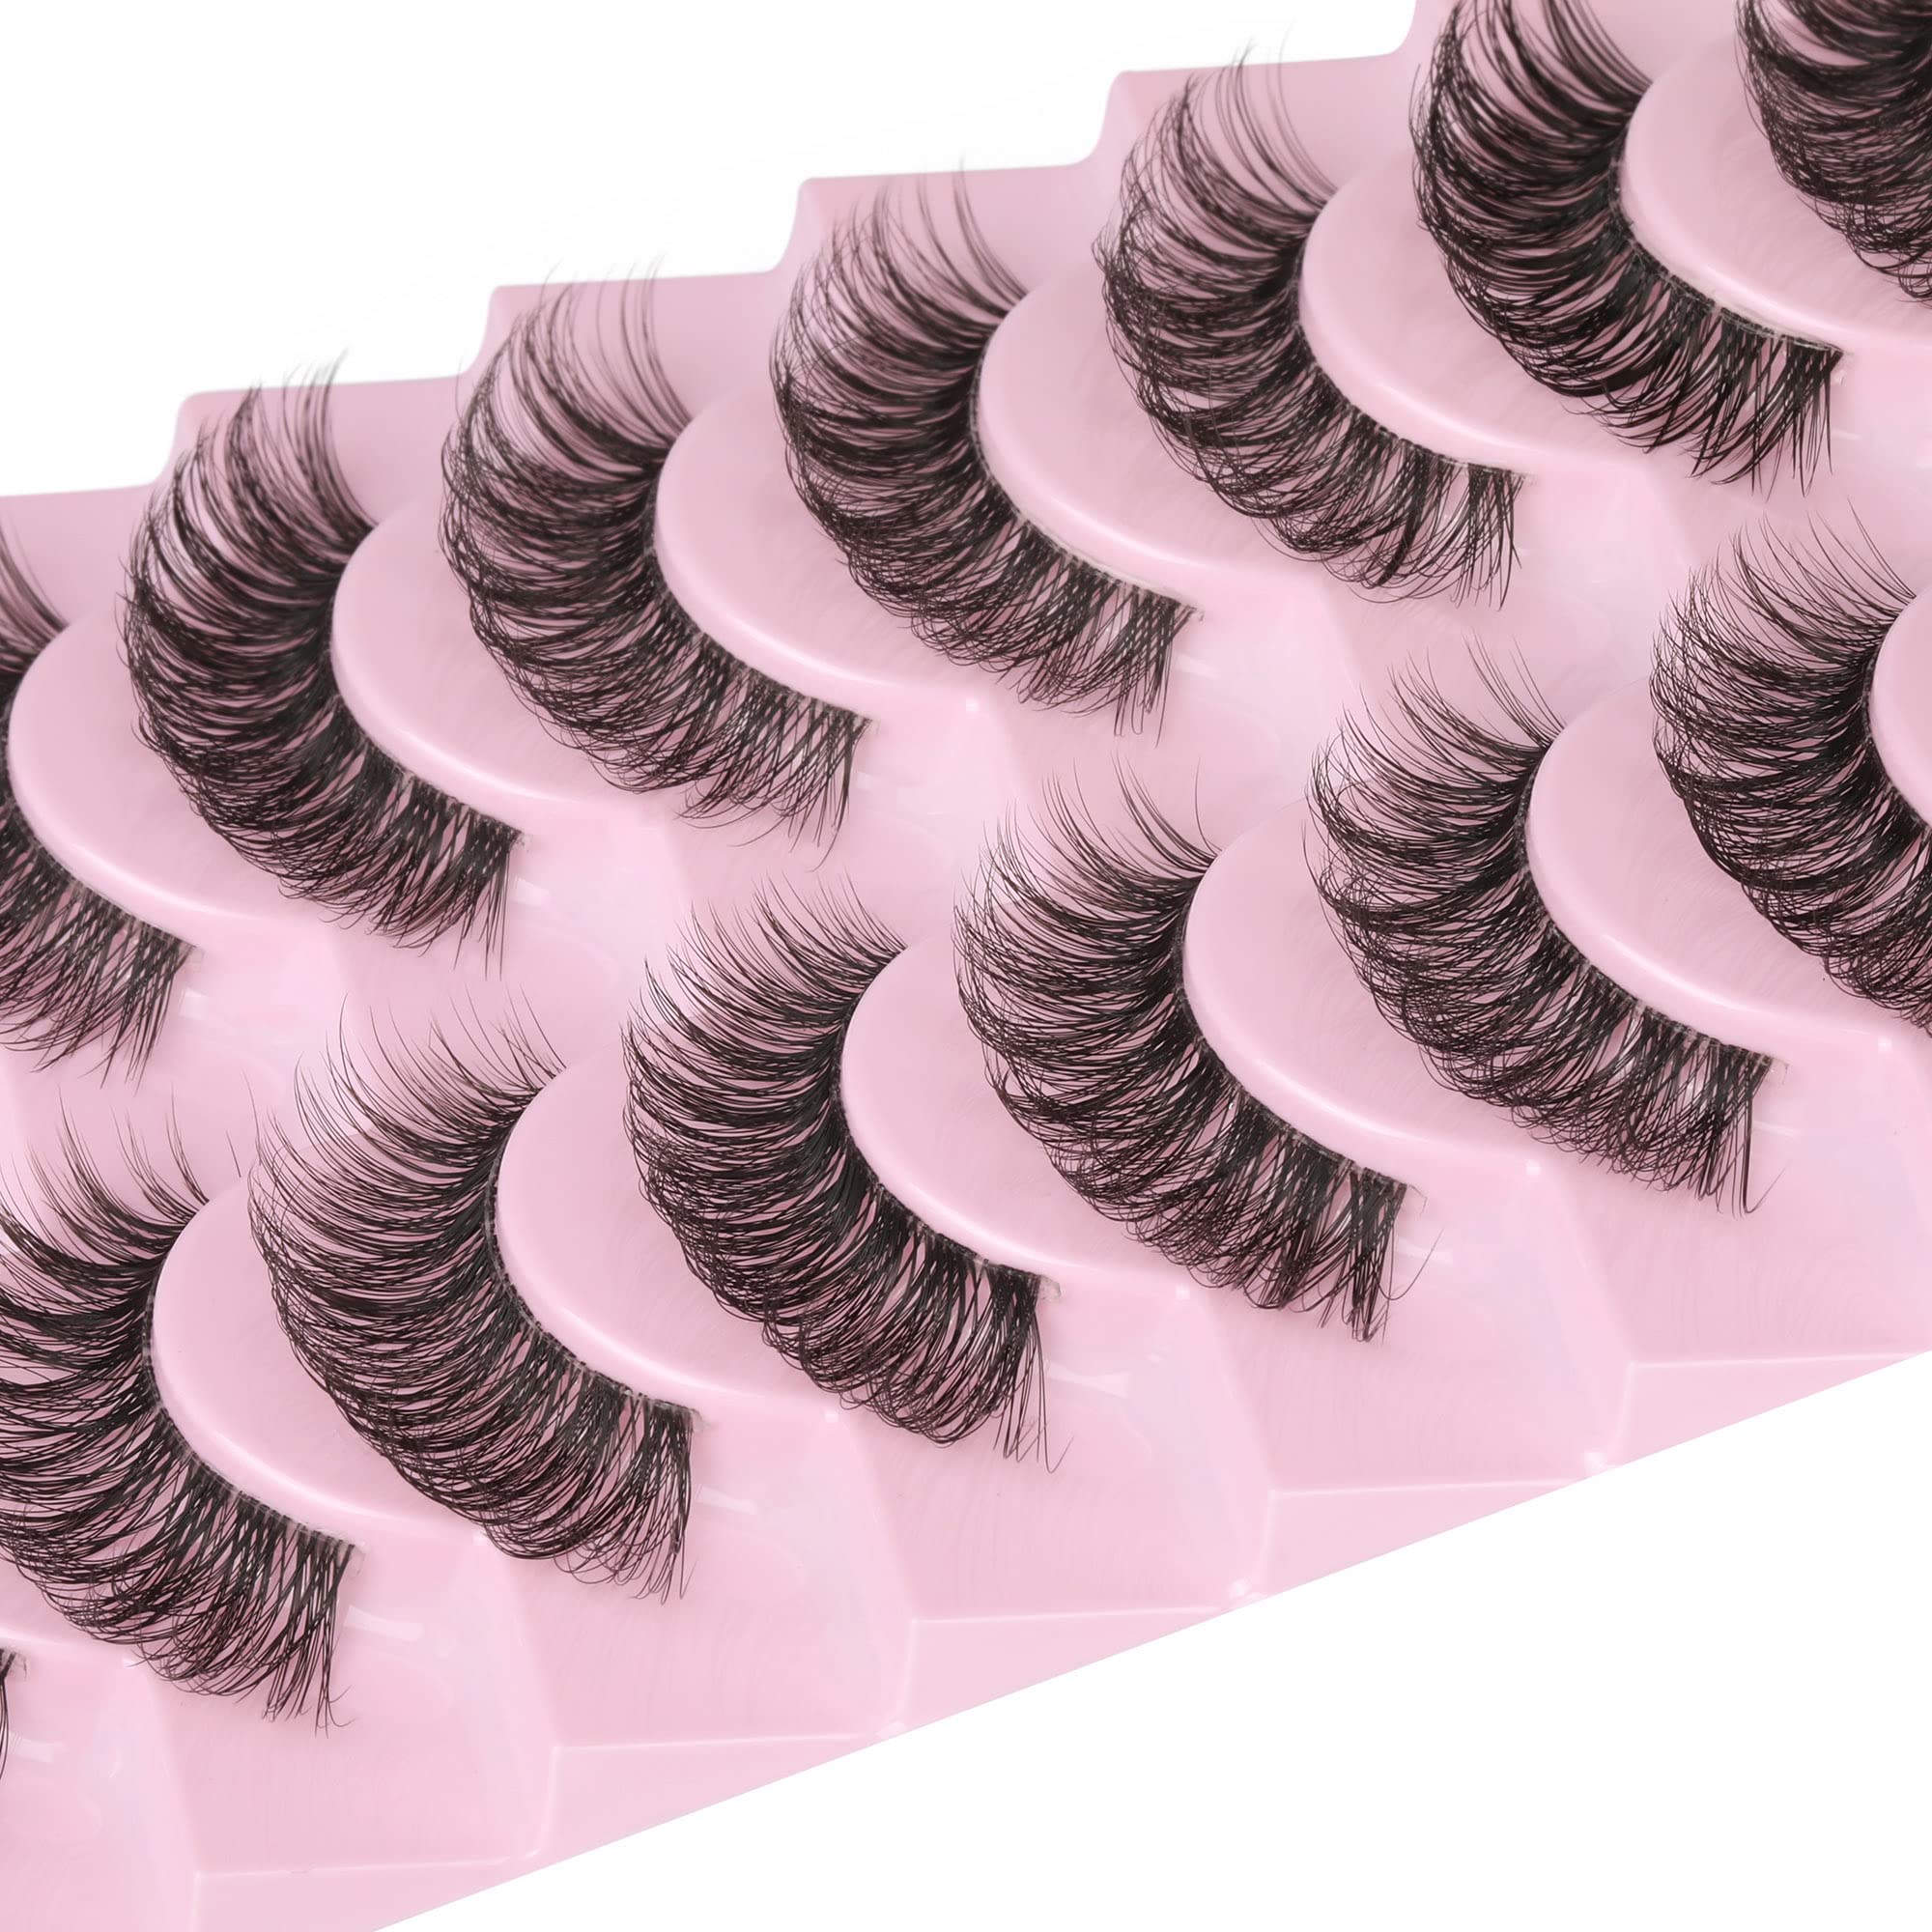 Clear Band Lashes Natural Look Wispy Mink Eyelashes Fluffy 16mm Cat Eye Lashes Pack 5D 10 Pairs Fake Eyelashes by TNFVLONEINS